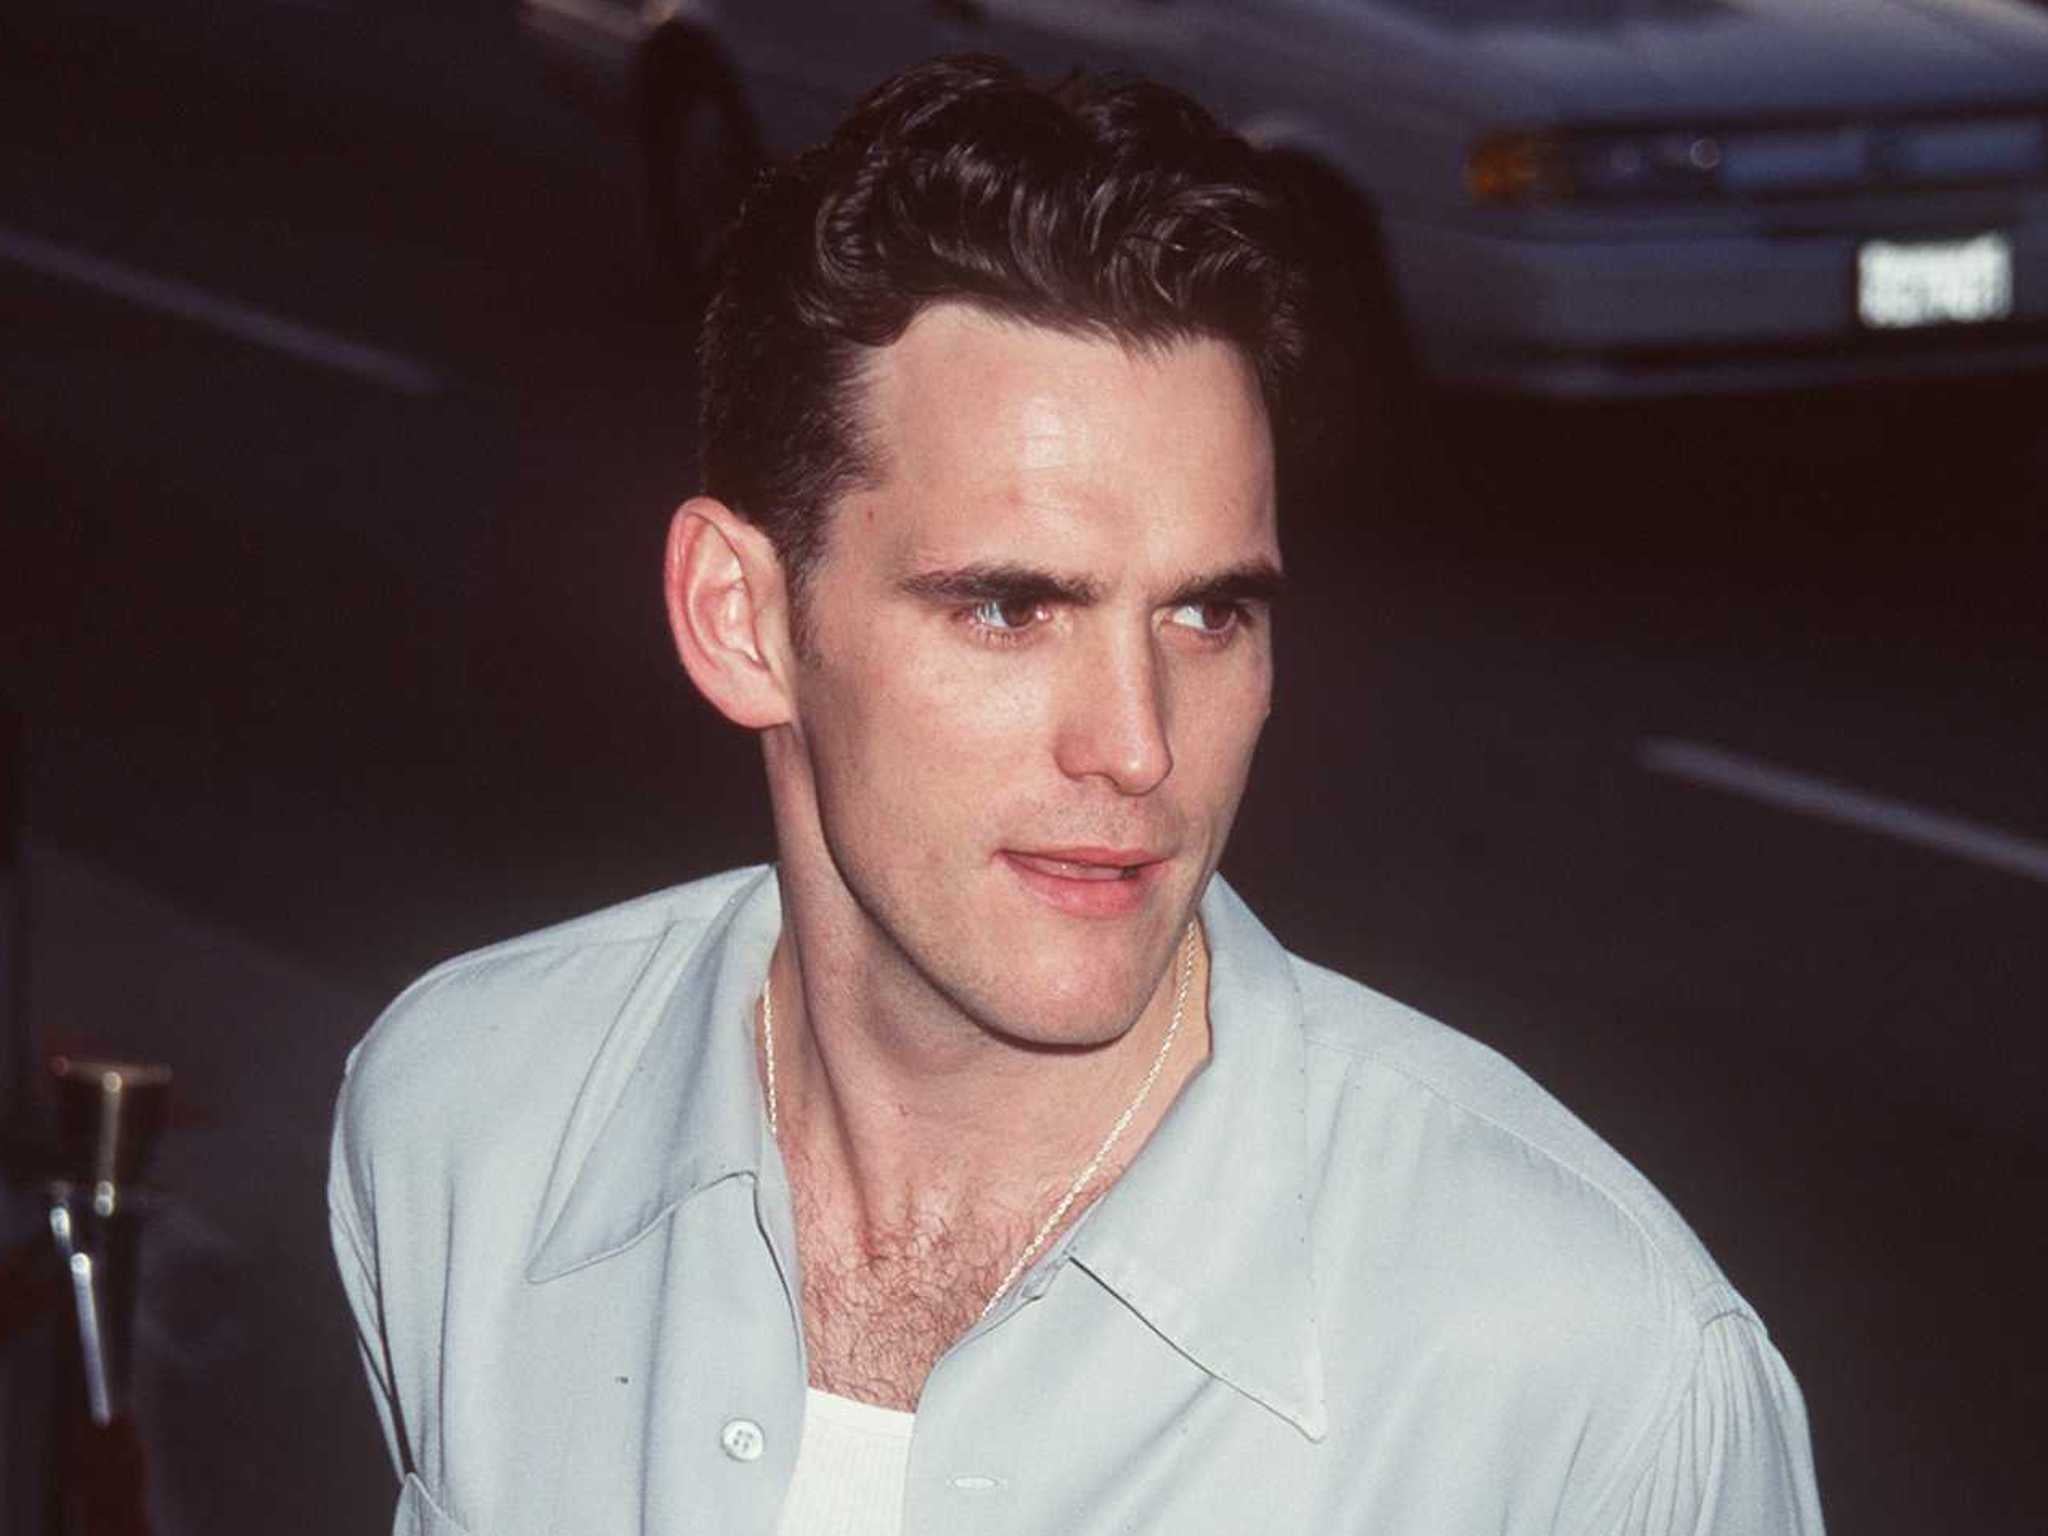 Matt Dillon will be feted with the lifetime achievement award at next month’s Locarno Festival